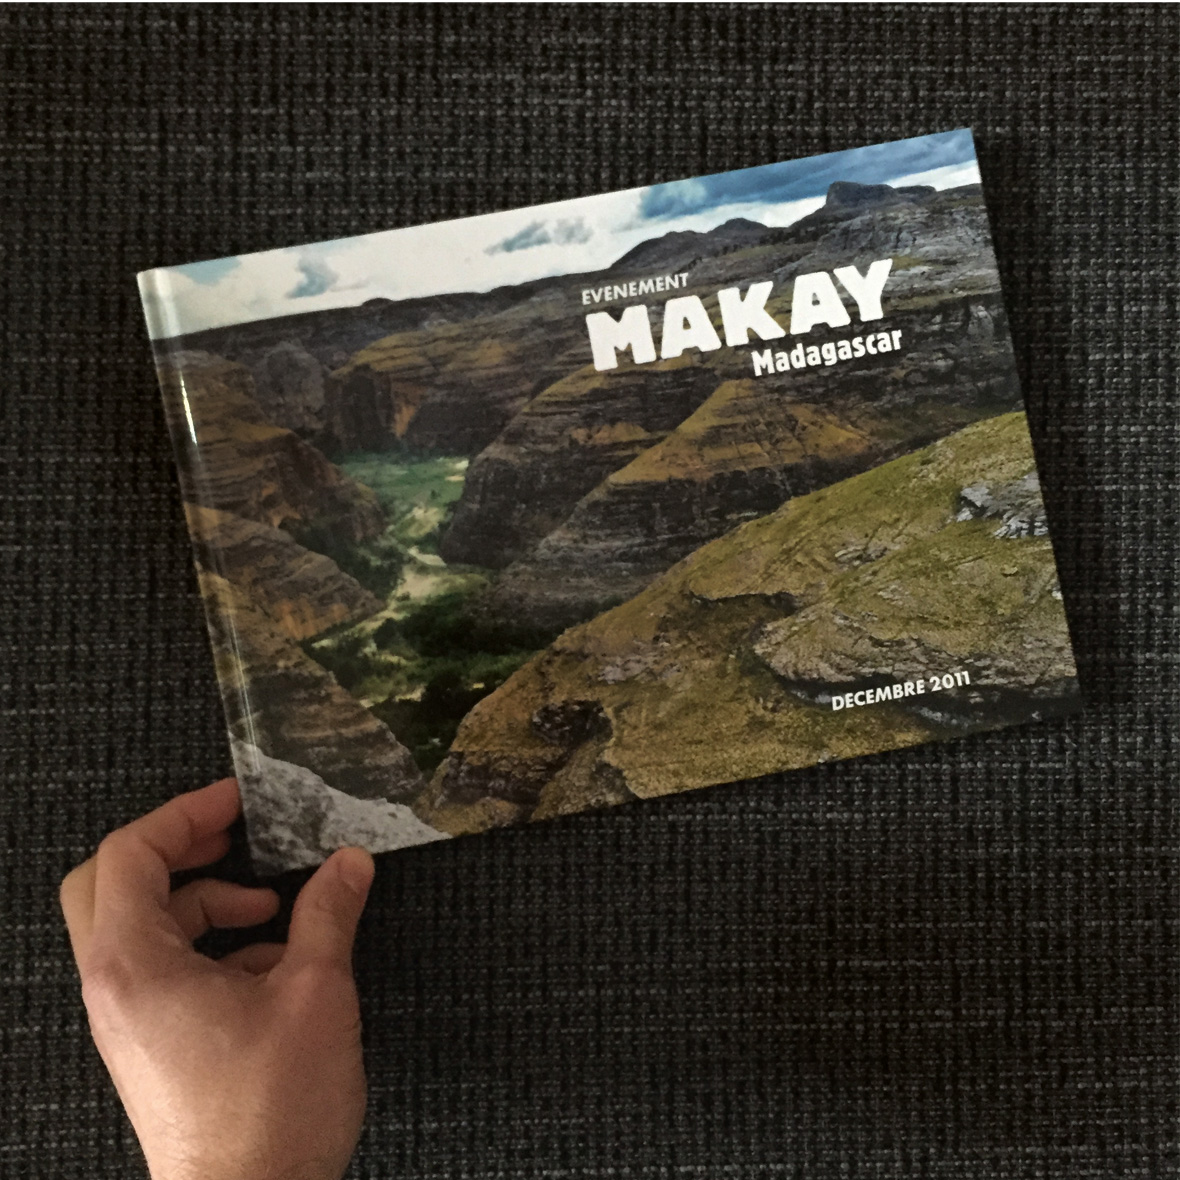 Livre documentaire "Makay" Canal plus